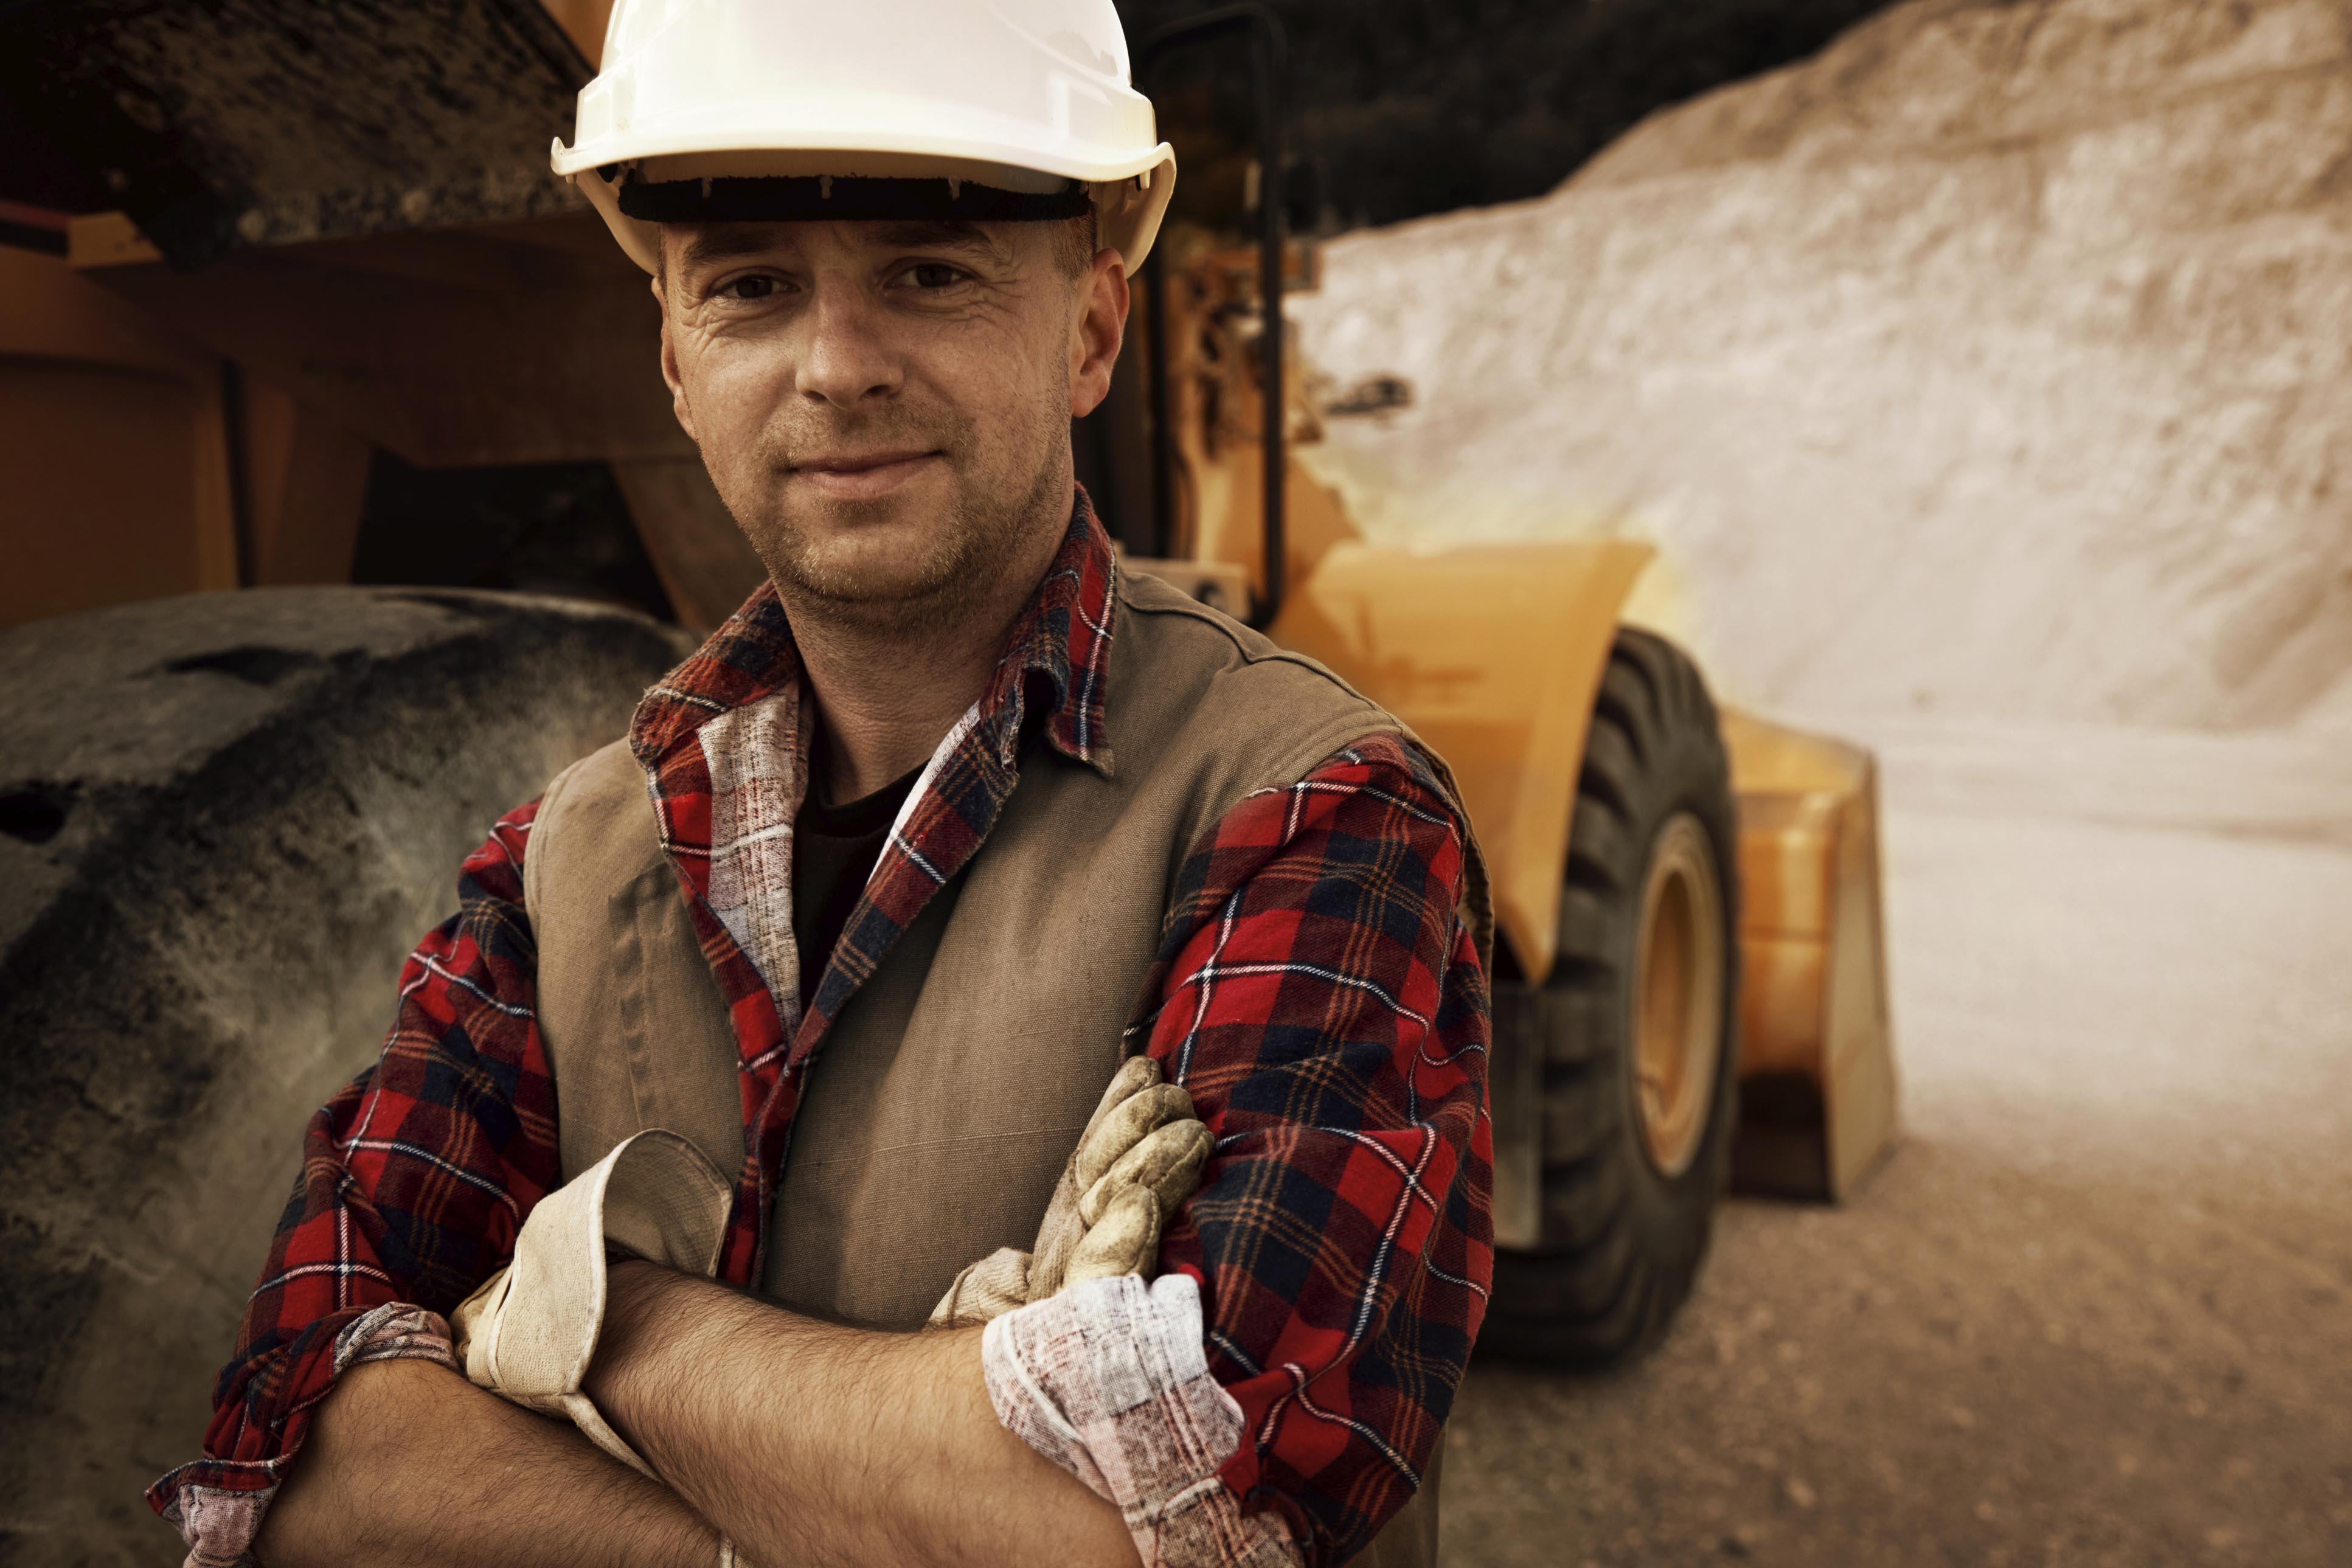 A man in a potash mine considering training for the mining industry.